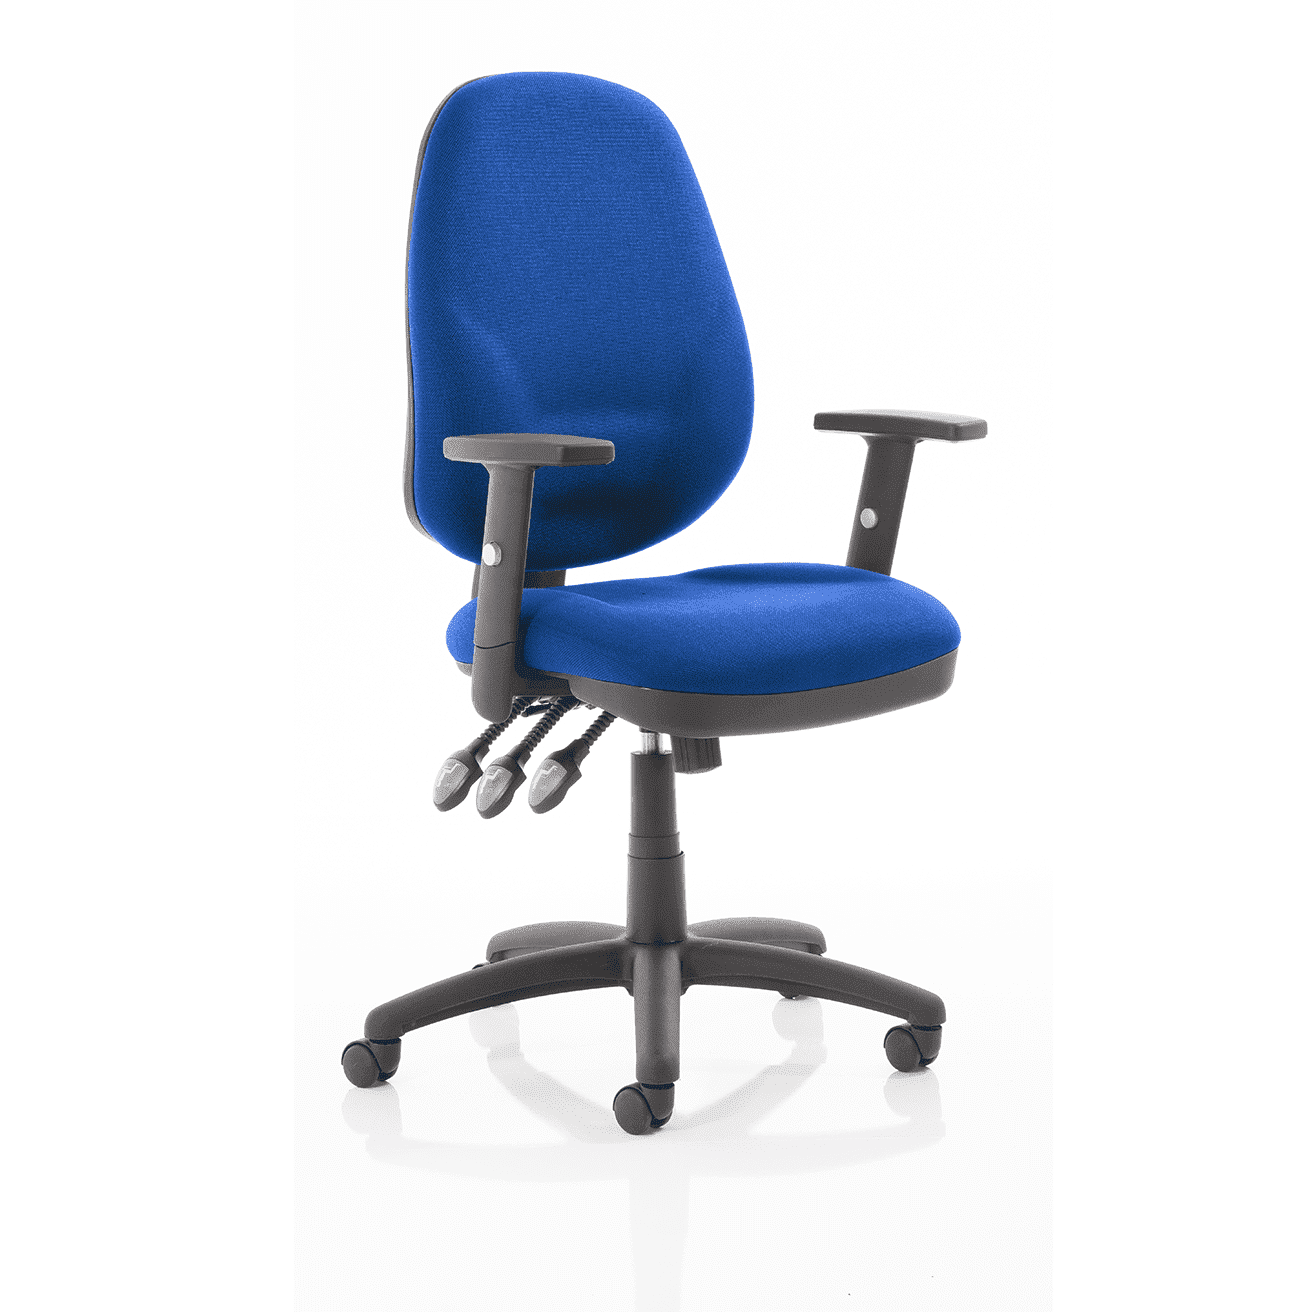 Eclipse Plus XL High Back Task Operator Office Chair - Fabric Seat & Back, Nylon Frame, 125kg Capacity, 8hr Usage, Adjustable Arms, 3yr Mechanism Warranty